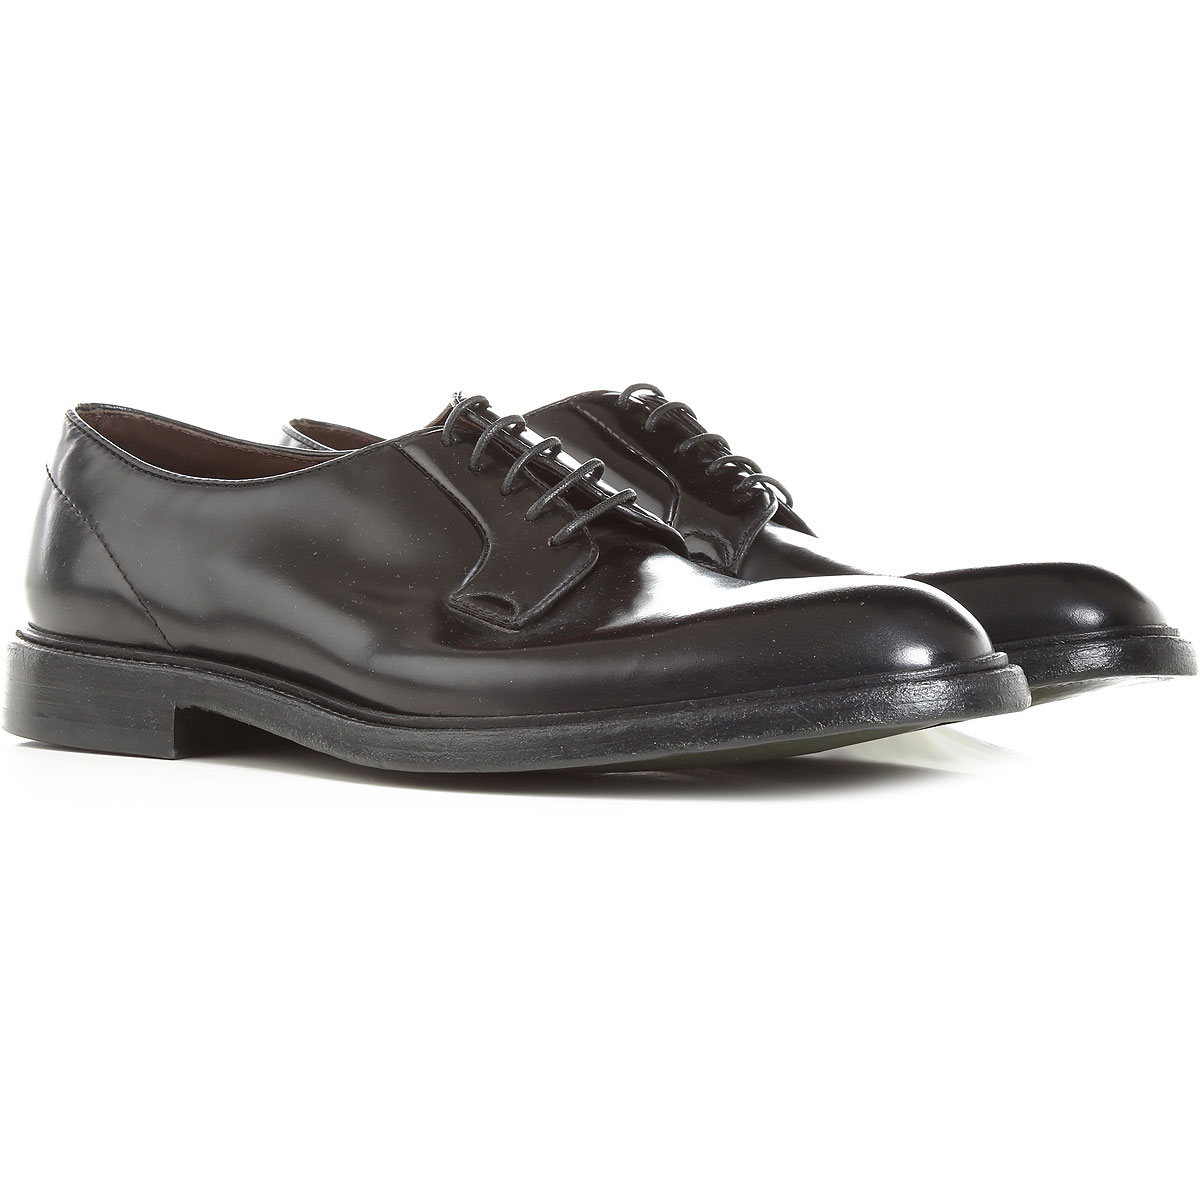 Mens Shoes Green George, Style code: 3029-polished-00